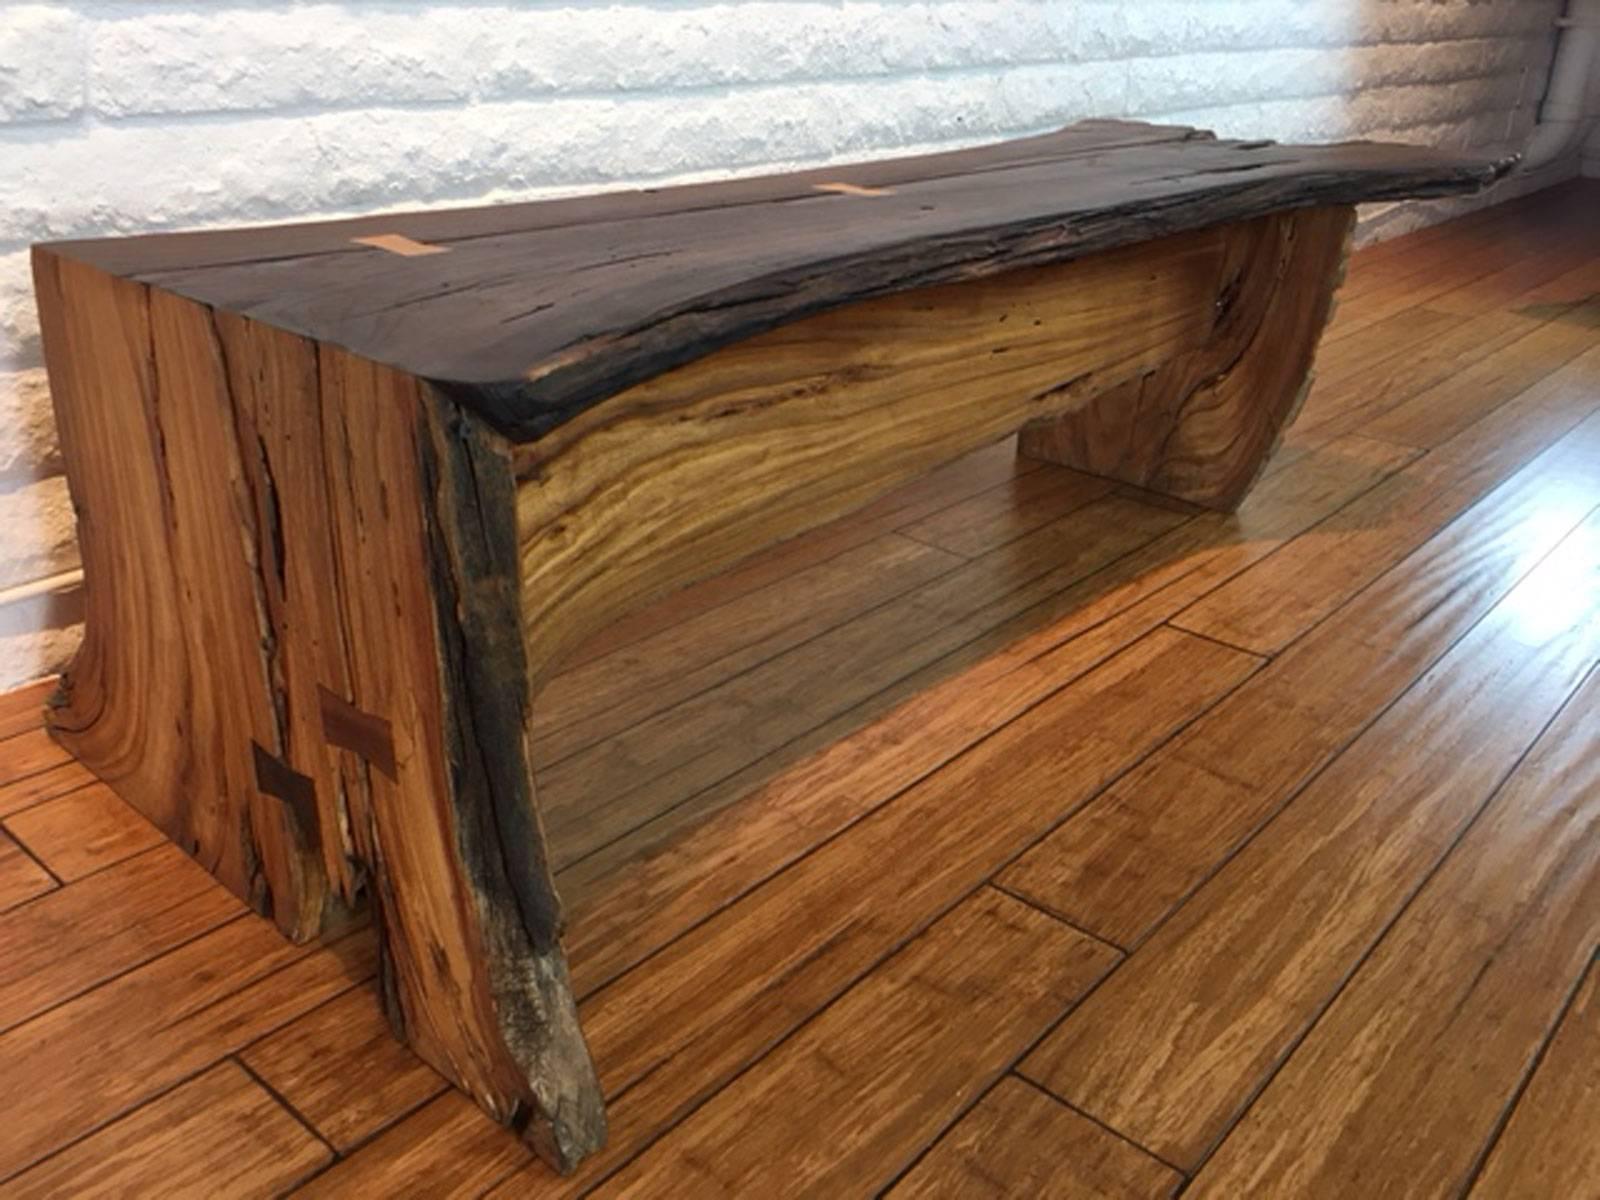 Long bench in pecan wood and inlay designed, produced and made by master wood artist and designer Scott Mills who only uses reclaimed (deadfall or storm downed trees) in the pieces he designs and produces. This piece is big, solid, eye-catching, and